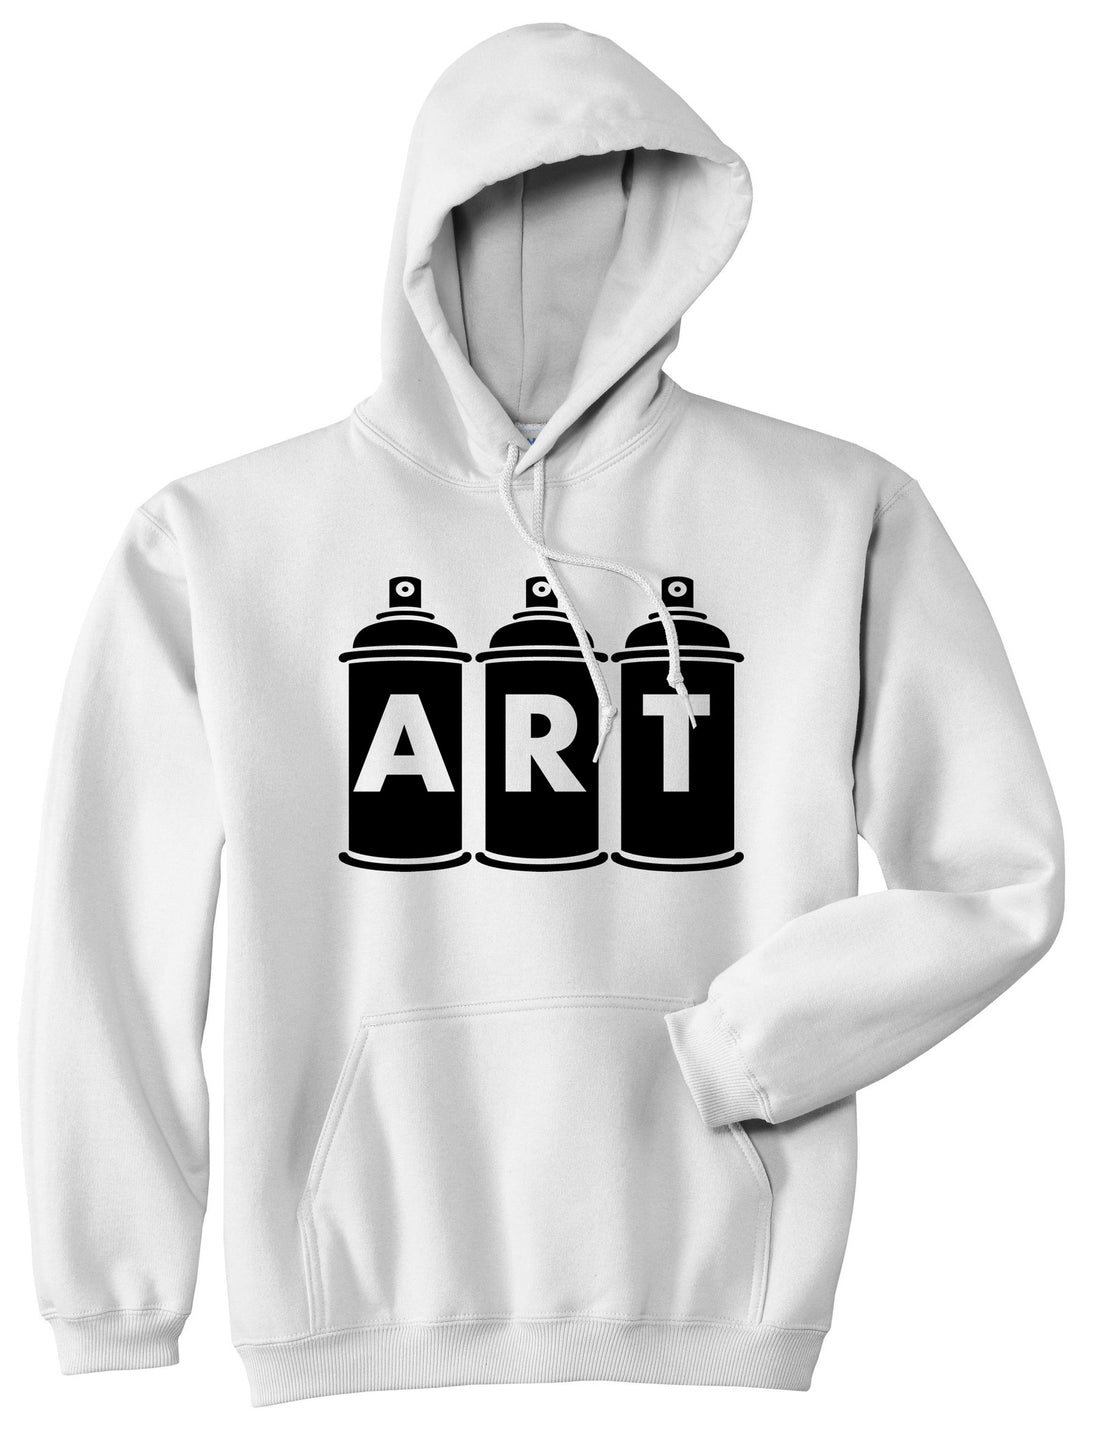 Art graf graffiti spray can paint artist Boys Kids Pullover Hoodie Hoody in White By Kings Of NY